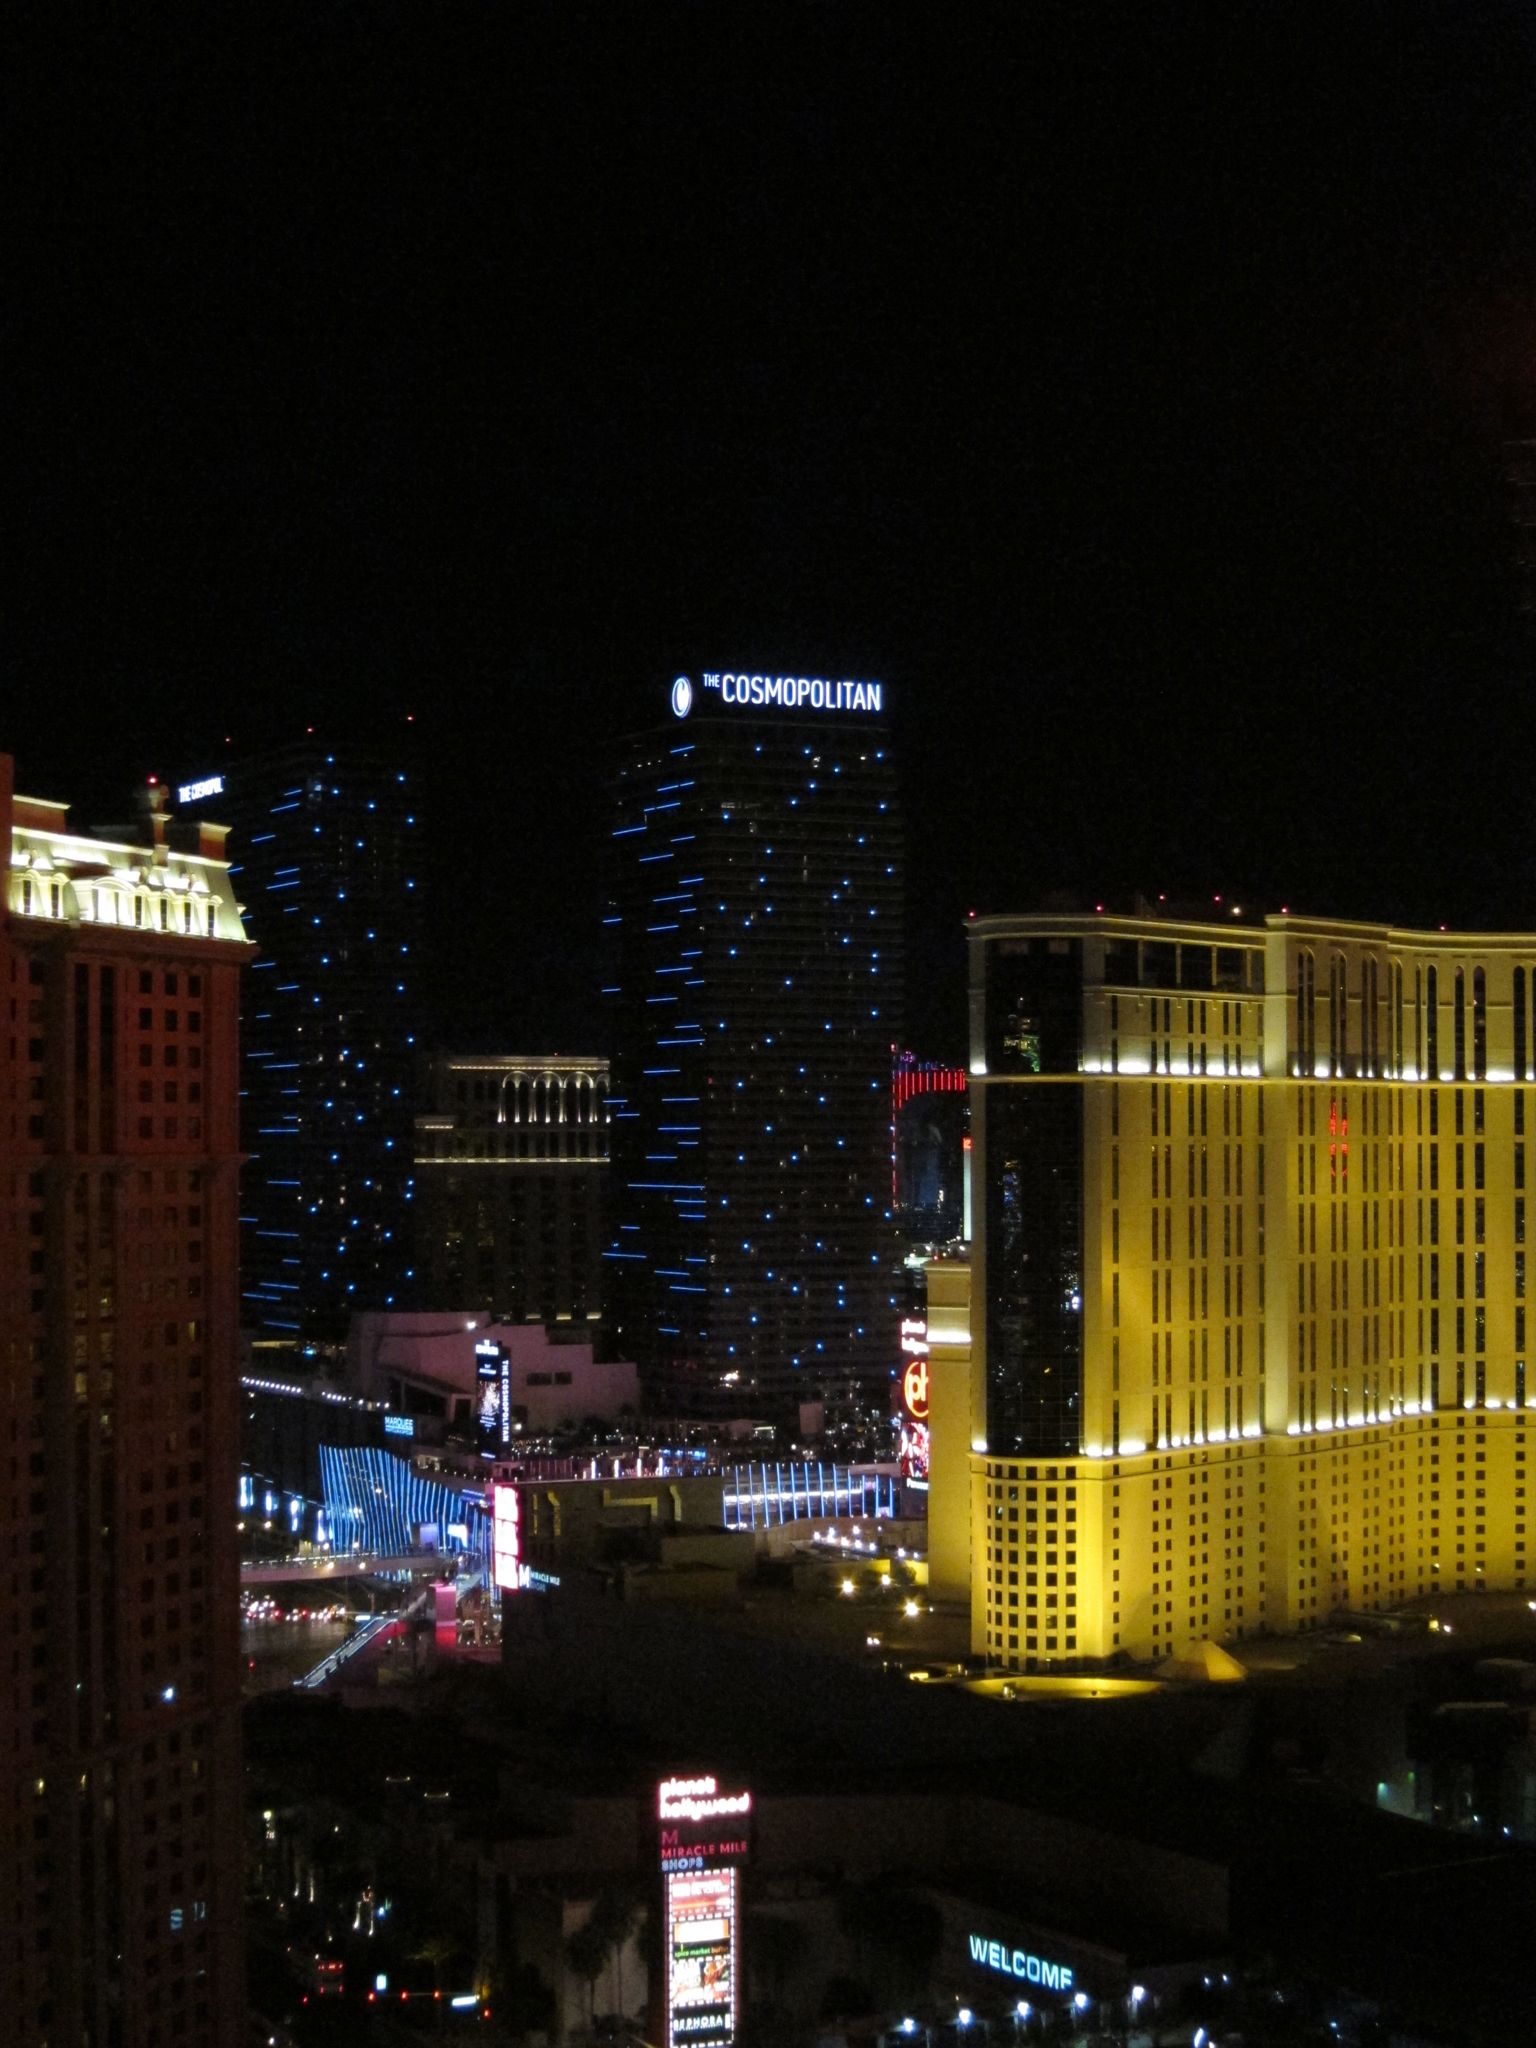 Photo 31 of 44 from the album Highlights Las Vegas 2011.